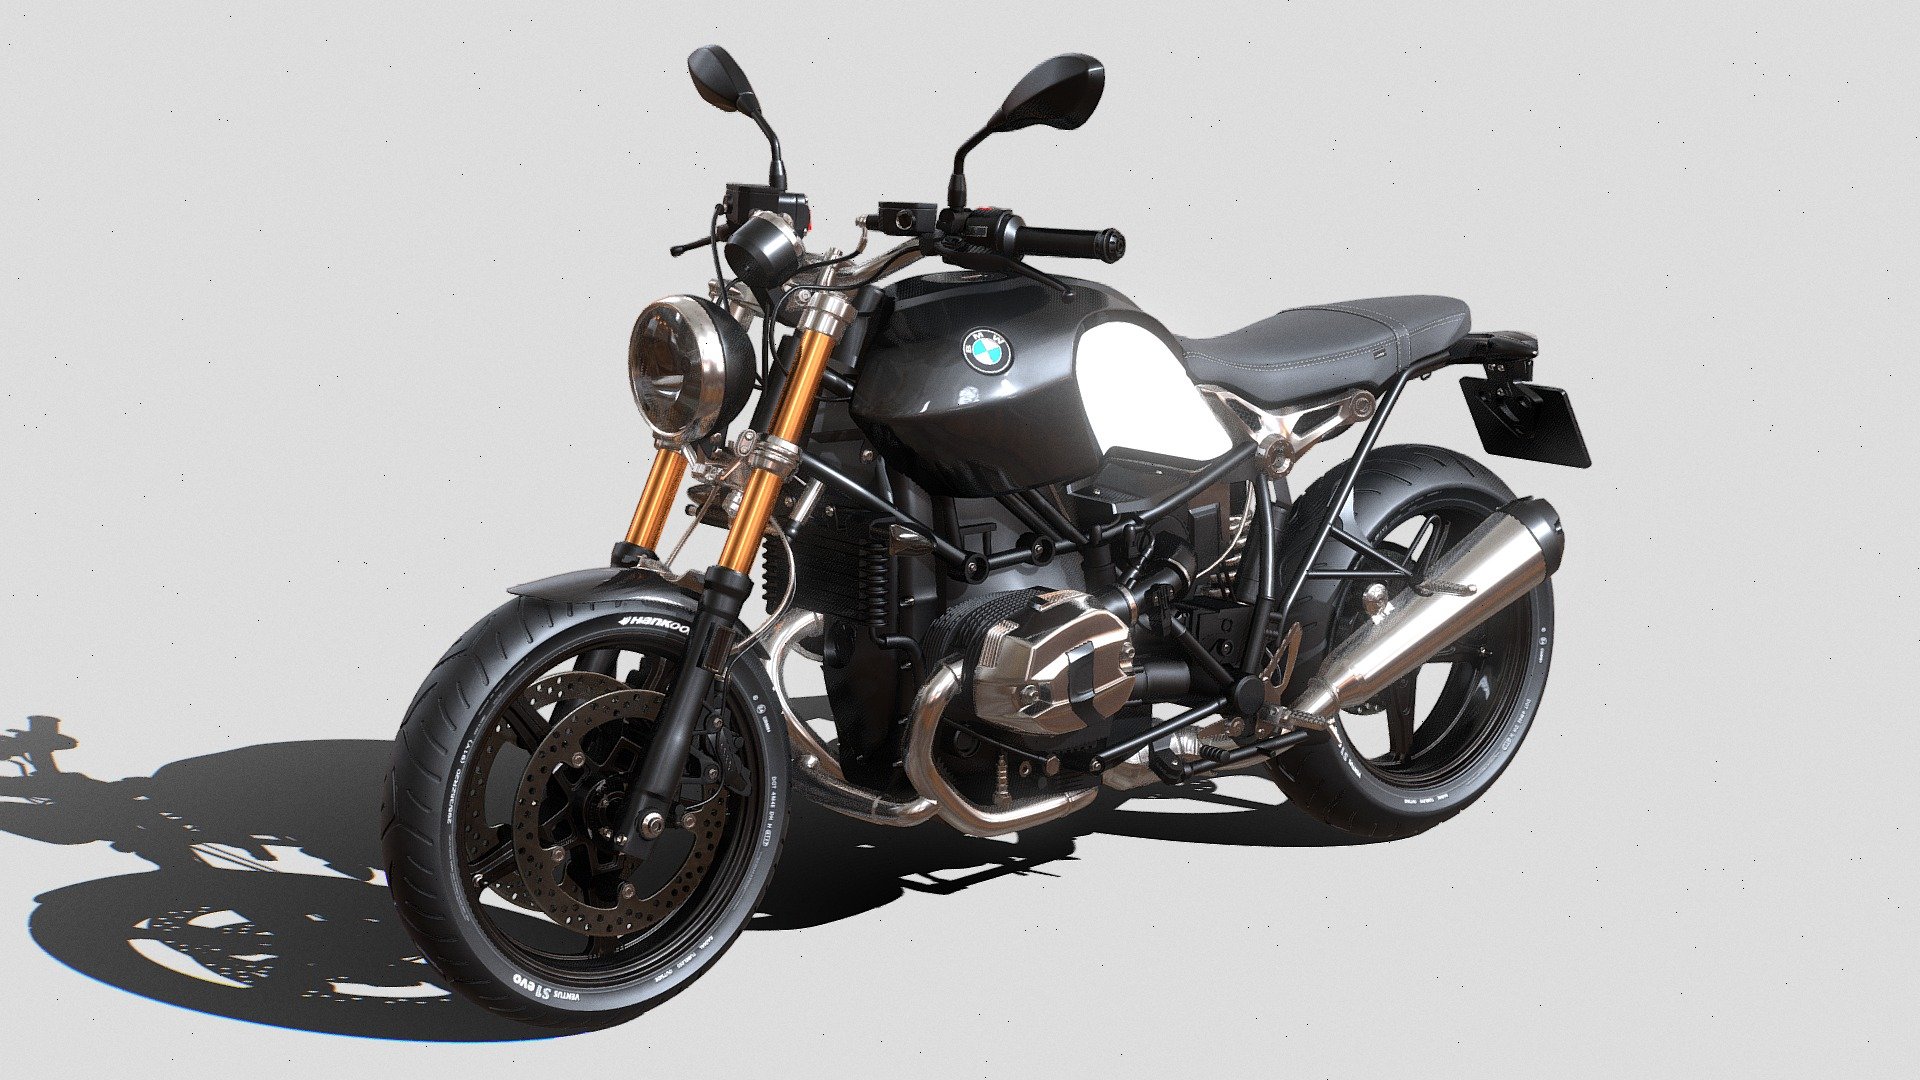 A high quality model of BMW R nineT Game ready VR/AR Compatible.

Every object has material’s name, you can easily change or apply materials.

Low Poly can be used in VR,Games Etc

Specs: All the textures are in jpg format and UVW wrapped. Model is fully textured with based on real object. All textures and materials are included and mapped in every format. Model does not include any backgrounds or scenes used in preview images. Renders made with Blender in Cycles.

This model is high quality, photo realalistic. The model has a fully textured, detailed design that allows for close-up renders, and was originally modeled and Textured in Blender. Fidelity is optimal up to a 4k render

If you liked my model, please leave some feedback. Thank you!

Hope you like it! Also check out my other models, just click on my user name to see complete gallery 3d model